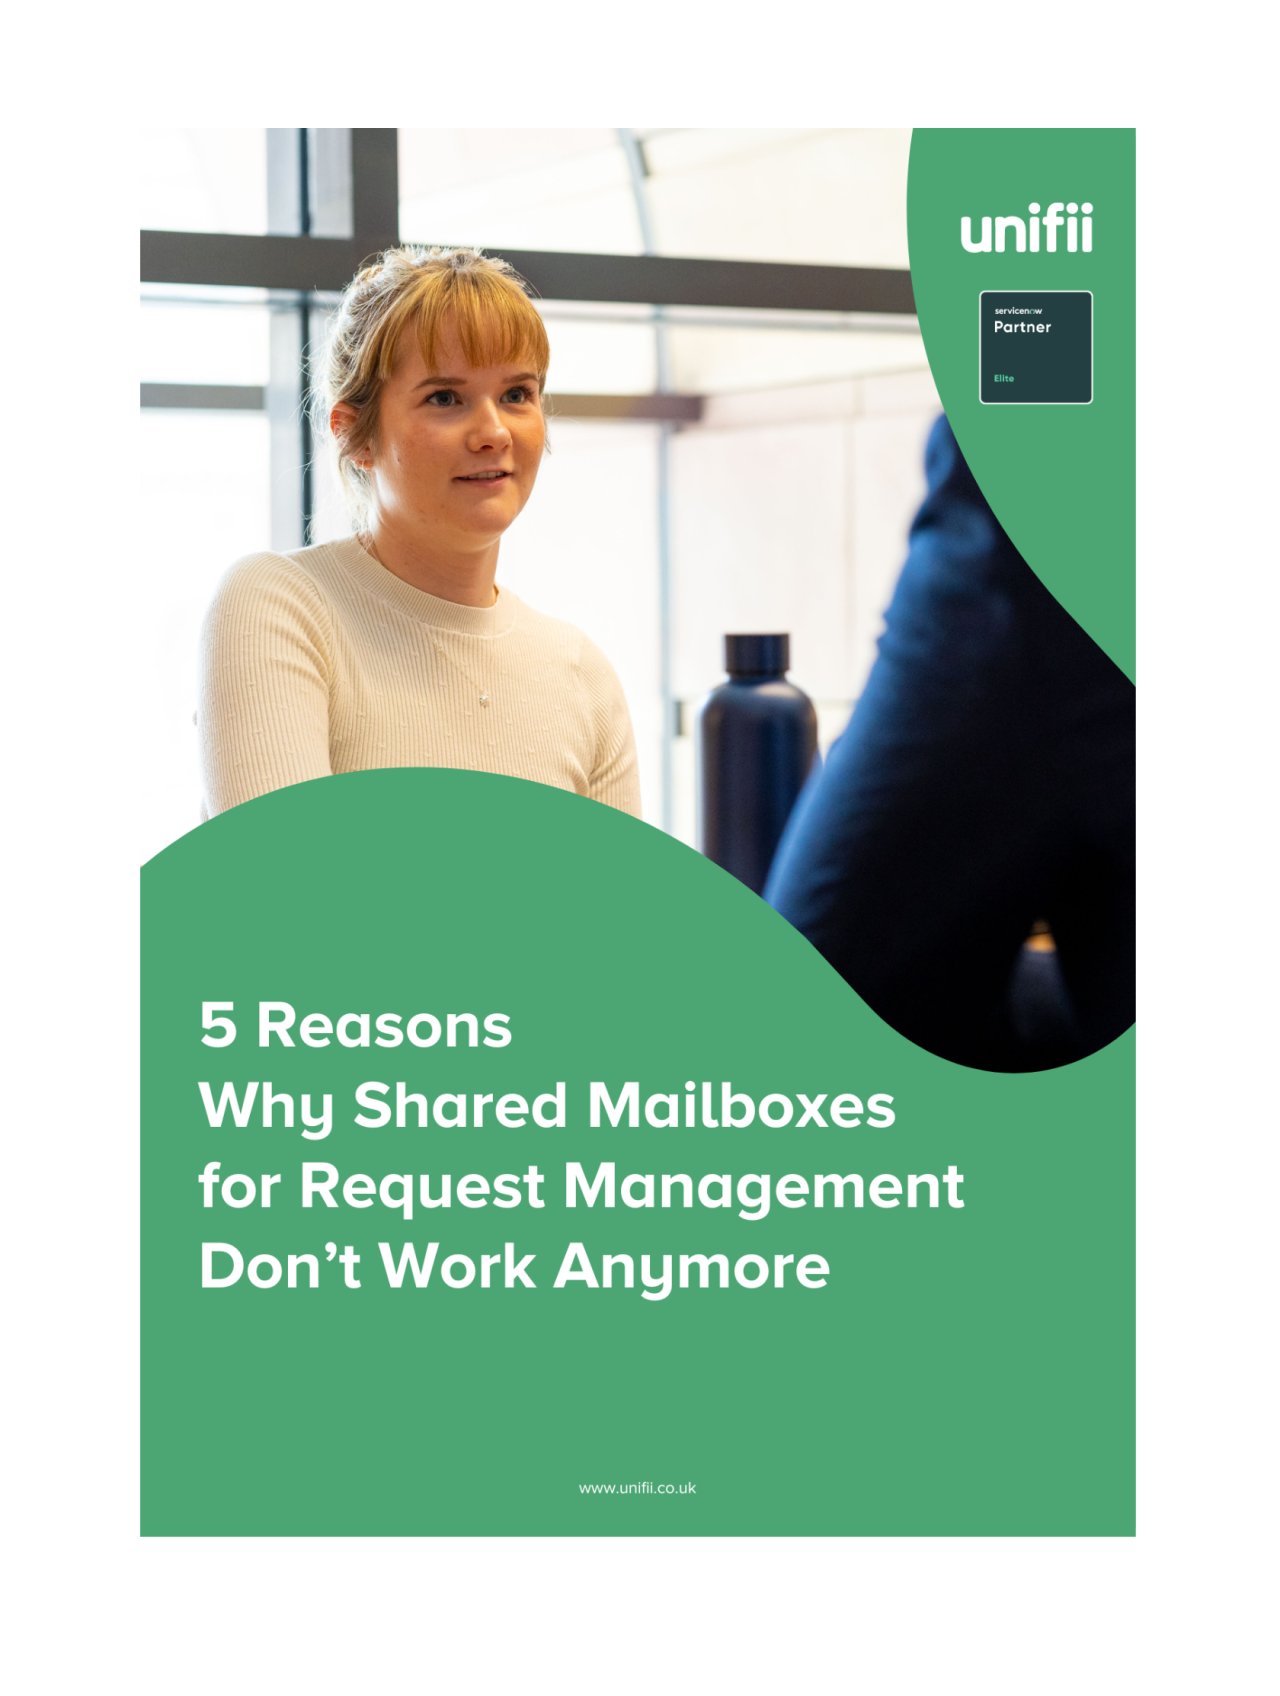 5 Reasons Why Shared Mailboxes for Request Management Don’t Work Anymore.